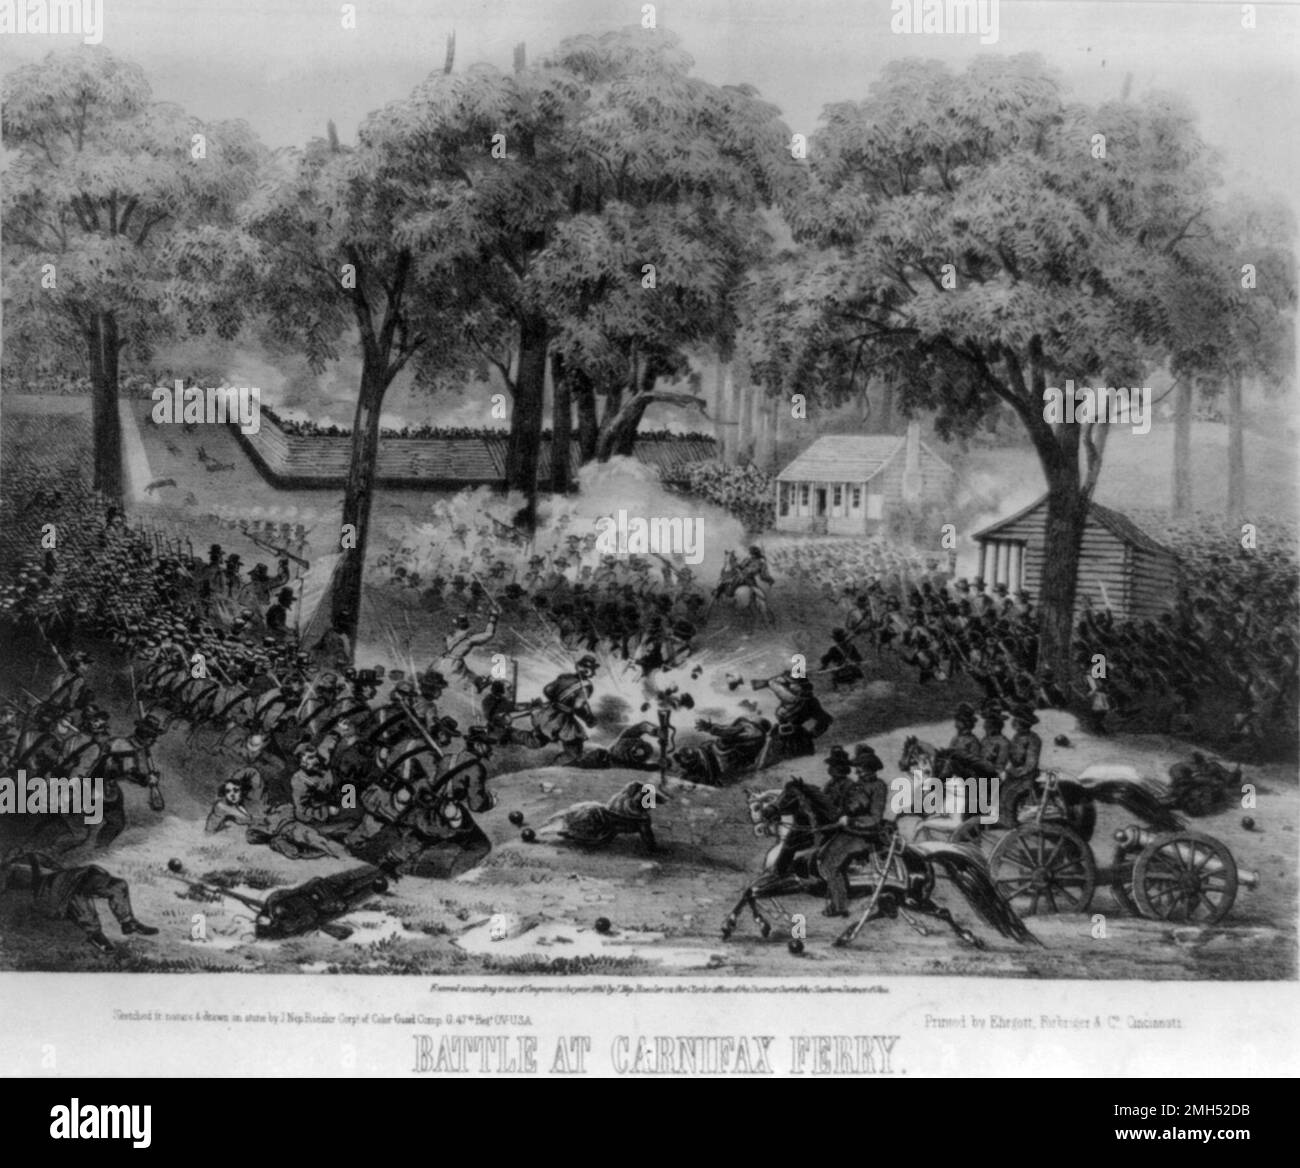 The Battle of Carnifax Feryy was a battle in the American Civil War. It took place on September 10, 1861 in West Virginia. It was won by the Unionist forces, with the Confederate forces retreating across the Gauley River. Stock Photo